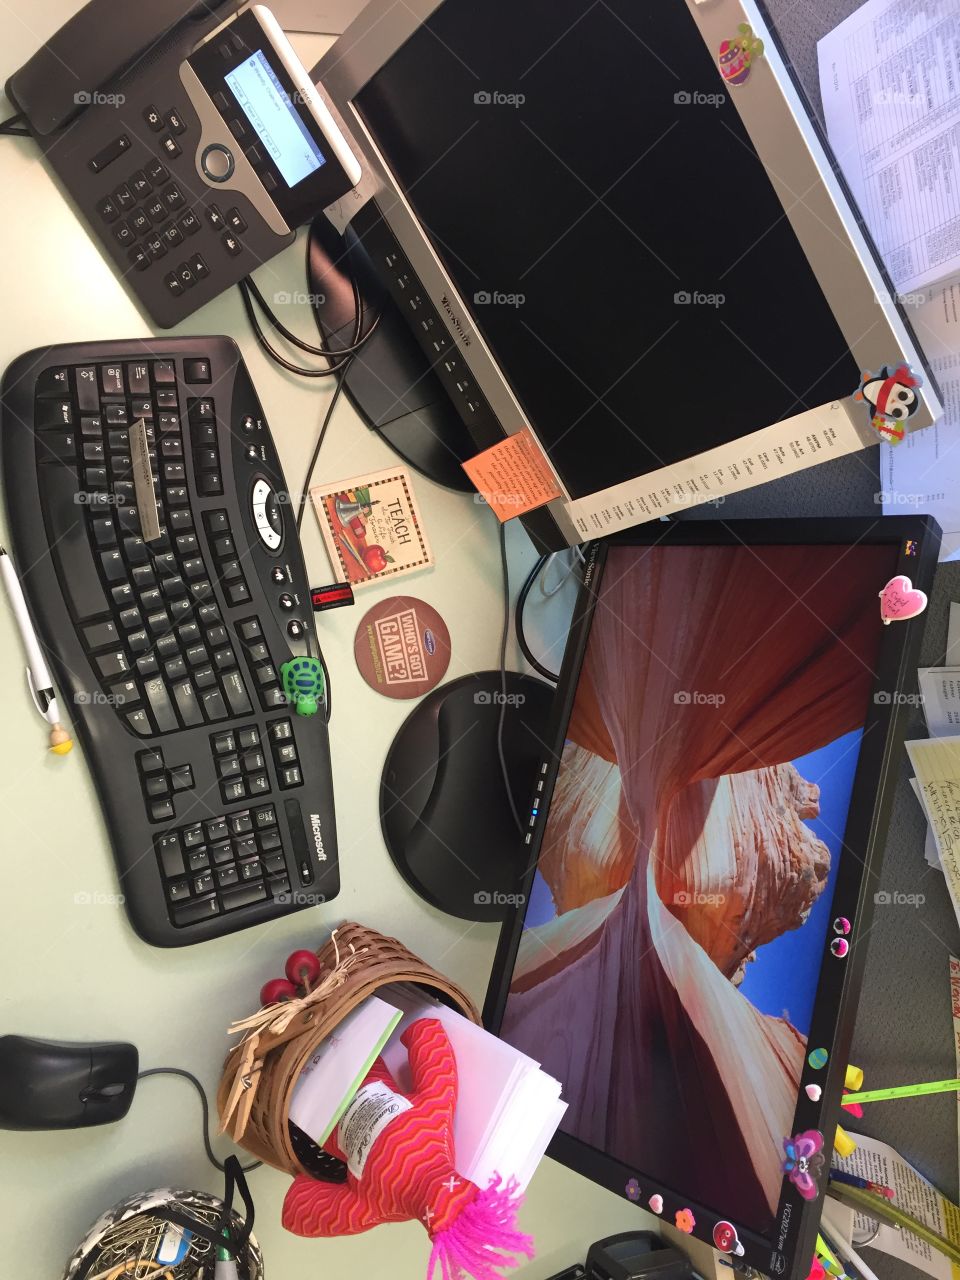 Two monitors to improve efficiency. A damn it doll for a frustrated student (or teacher). A construction man pen to make me smile. Coasters for my drinks. Stickers and doodads that were gifts from students or others.  Because a teachers job is never done!